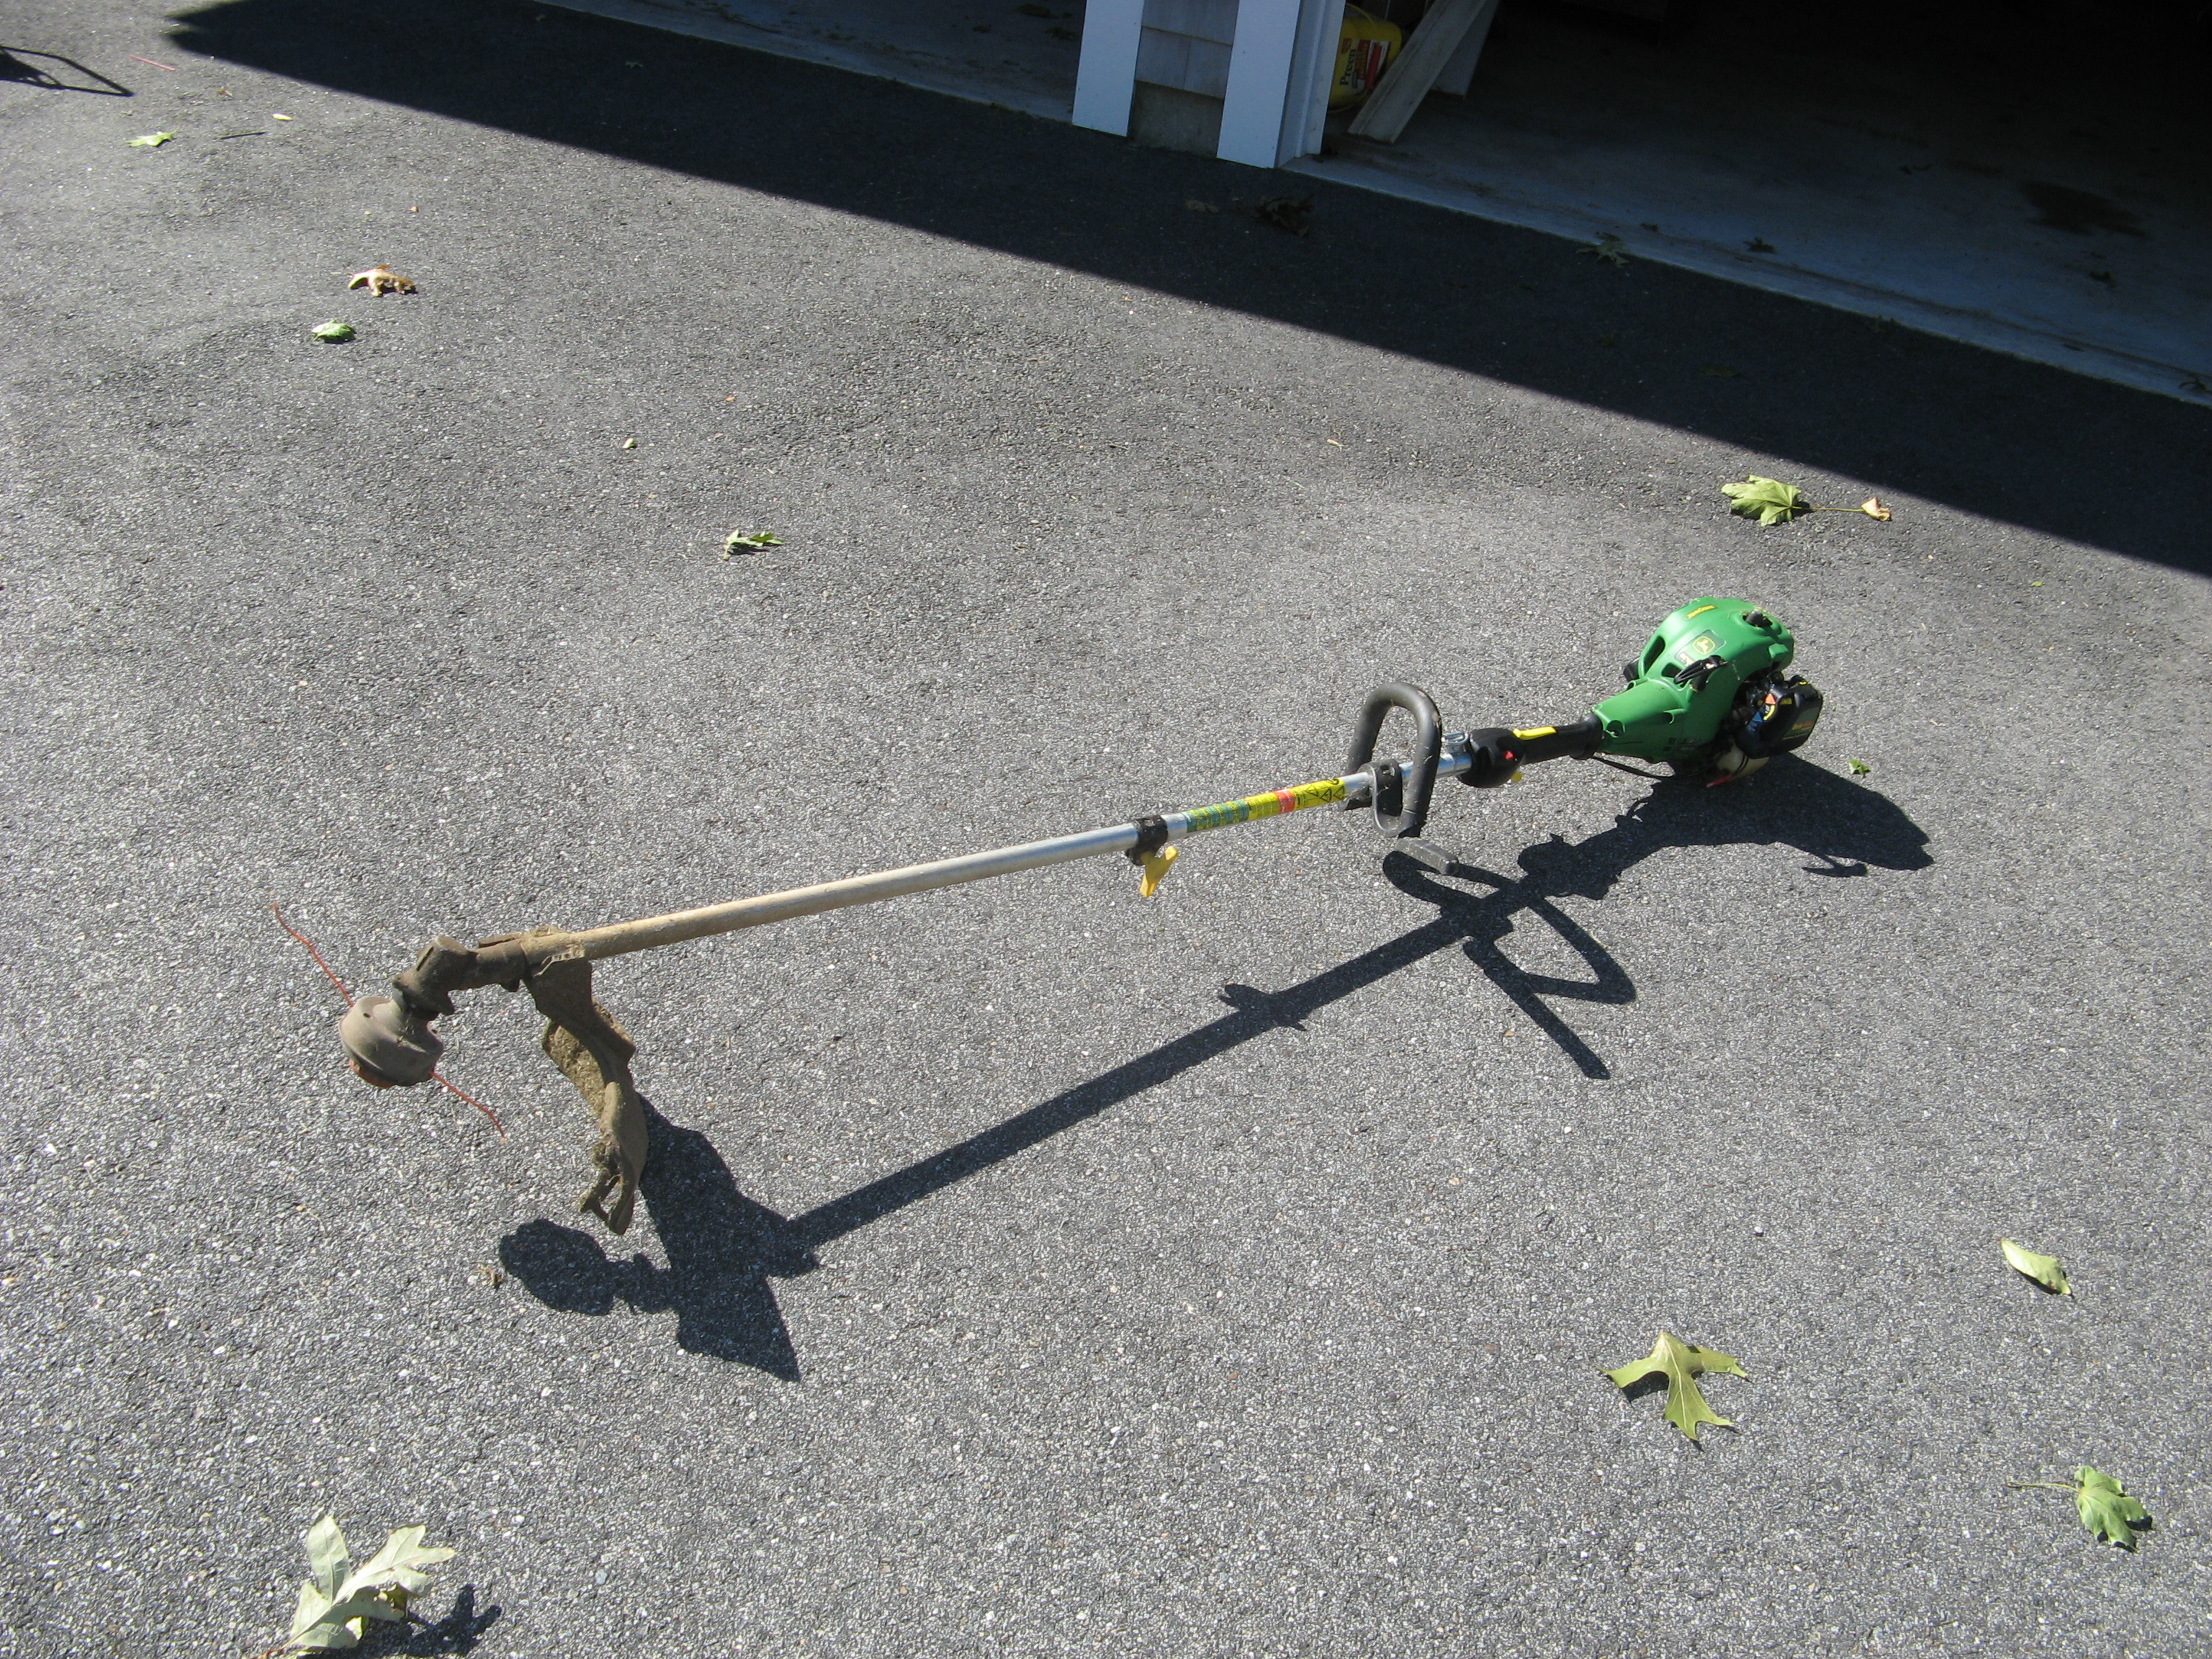 What's the benefit of using a John Deere line trimmer?